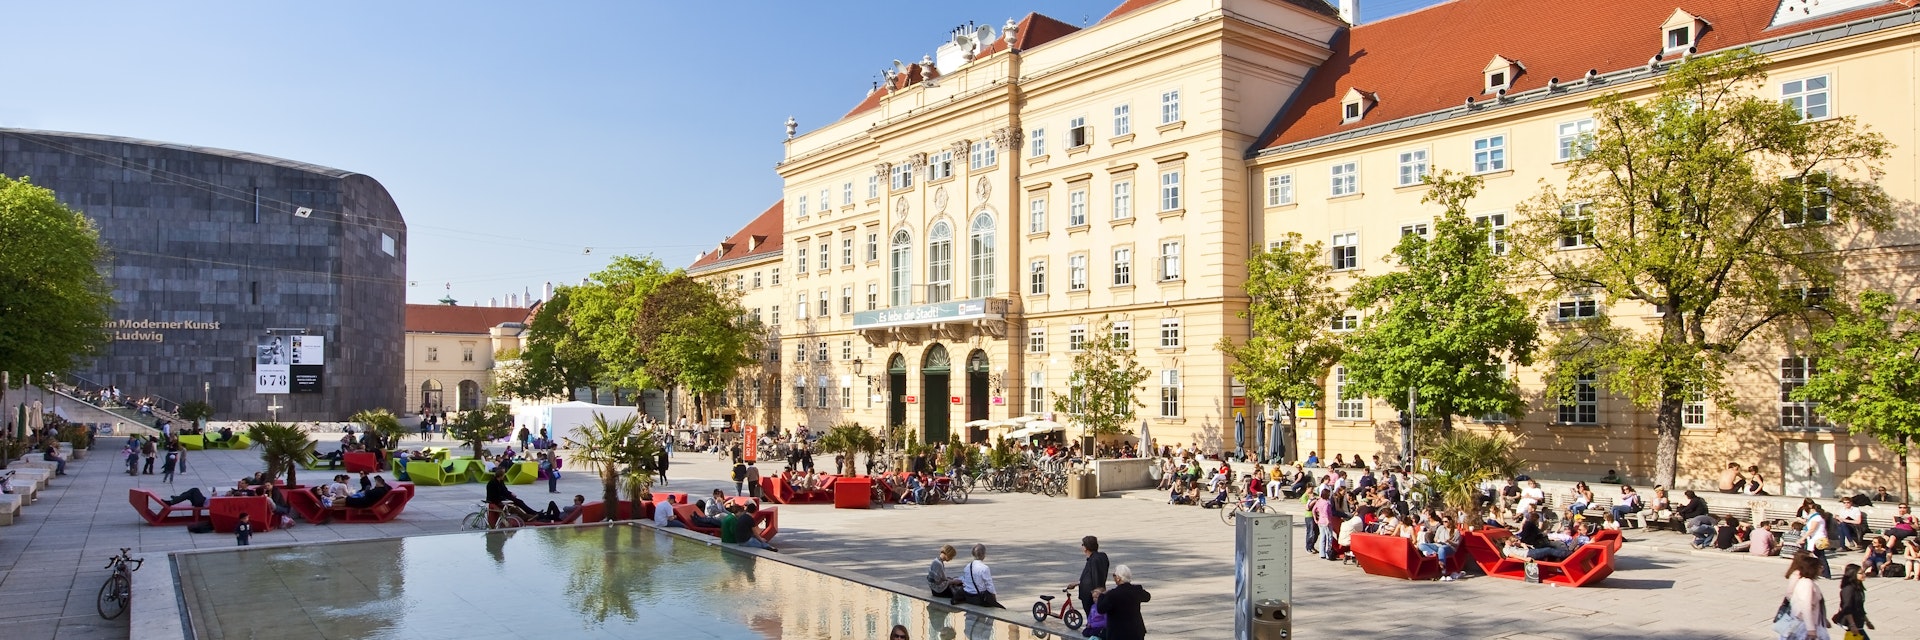 VIENNA, AUSTRIA - APRIL 19: Many people enjoy a sunny afternoon at the Museumsquartier on April 19, 2011 in Vienna. It is the eighth largest cultural area in the world and a very important for Vienna; Shutterstock ID 202273378; Your name (First / Last): Josh Vogel; Project no. or GL code: 56530; Network activity no. or Cost Centre: Online-Design; Product or Project: 65050/7529/Josh Vogel/LP.com Destination Galleries